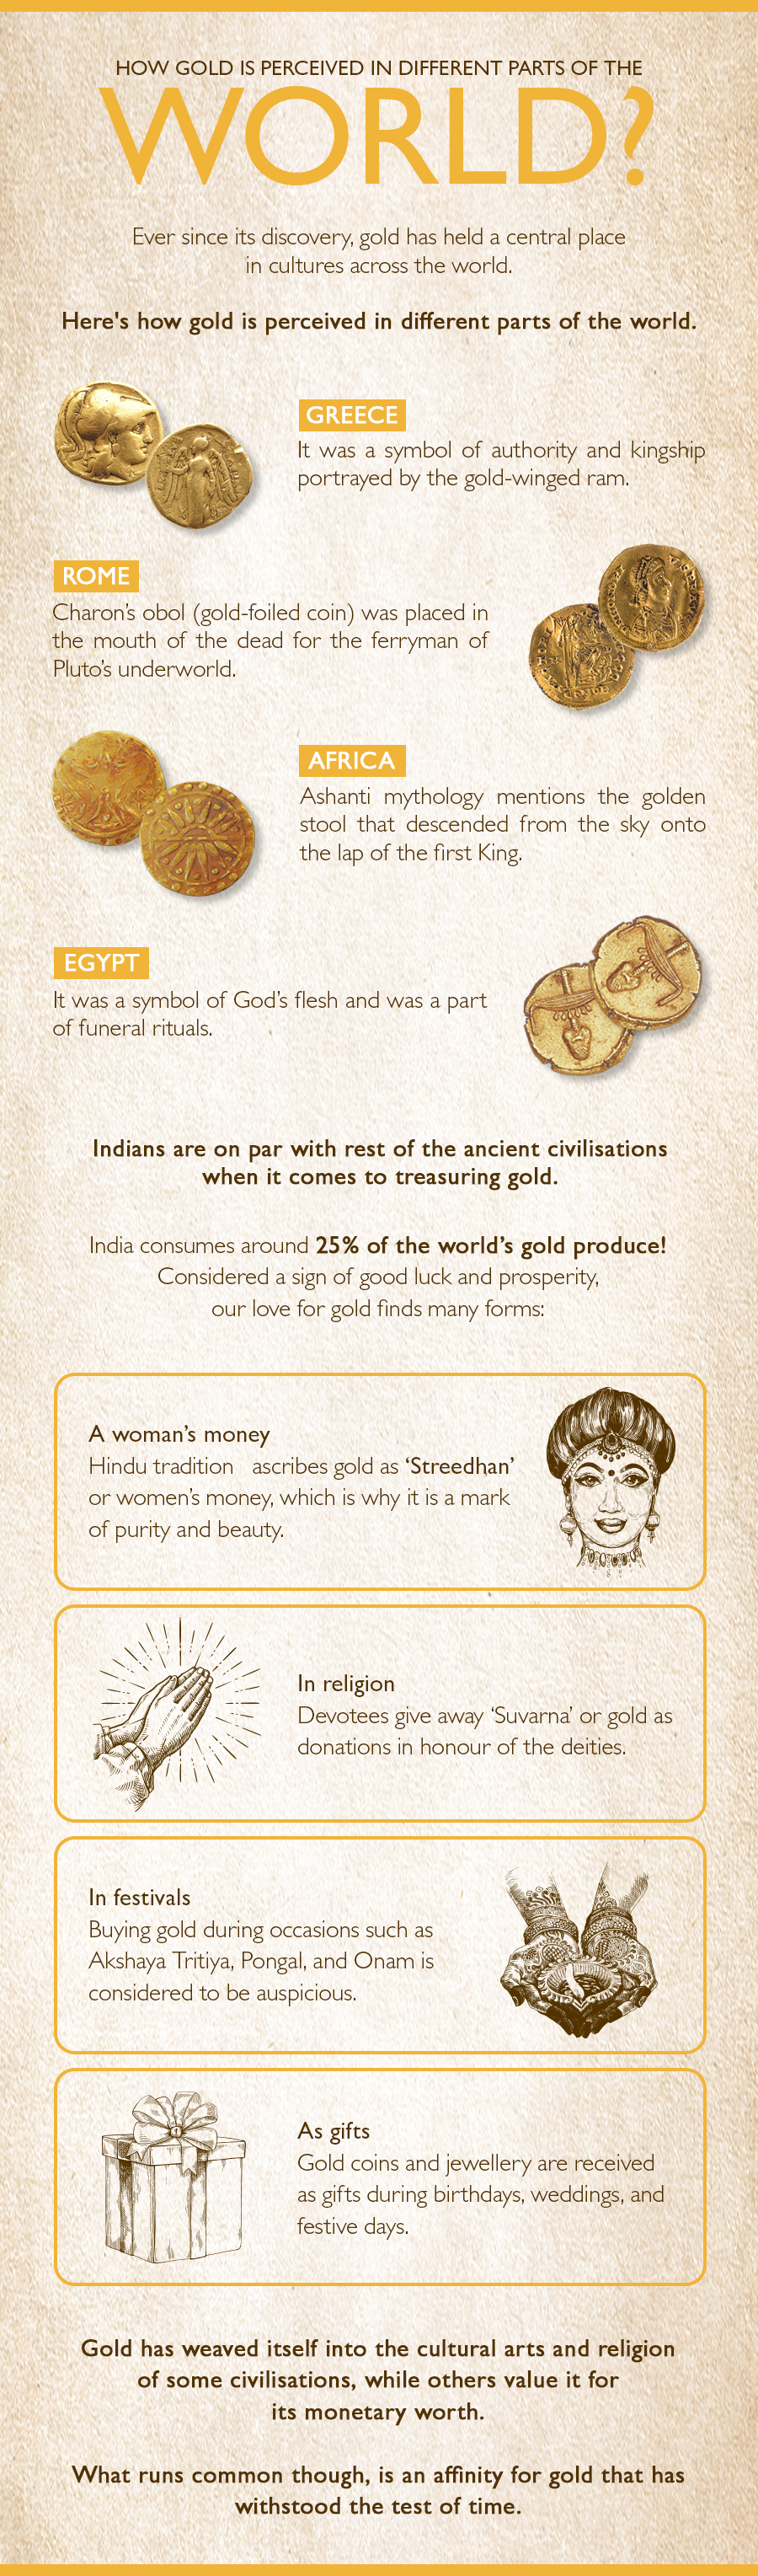 Gold has been a symbol of wealth and power. It has fascinated most cultures around the world and the desire for it has led to the destruction of some cultures and the growth in status of others.